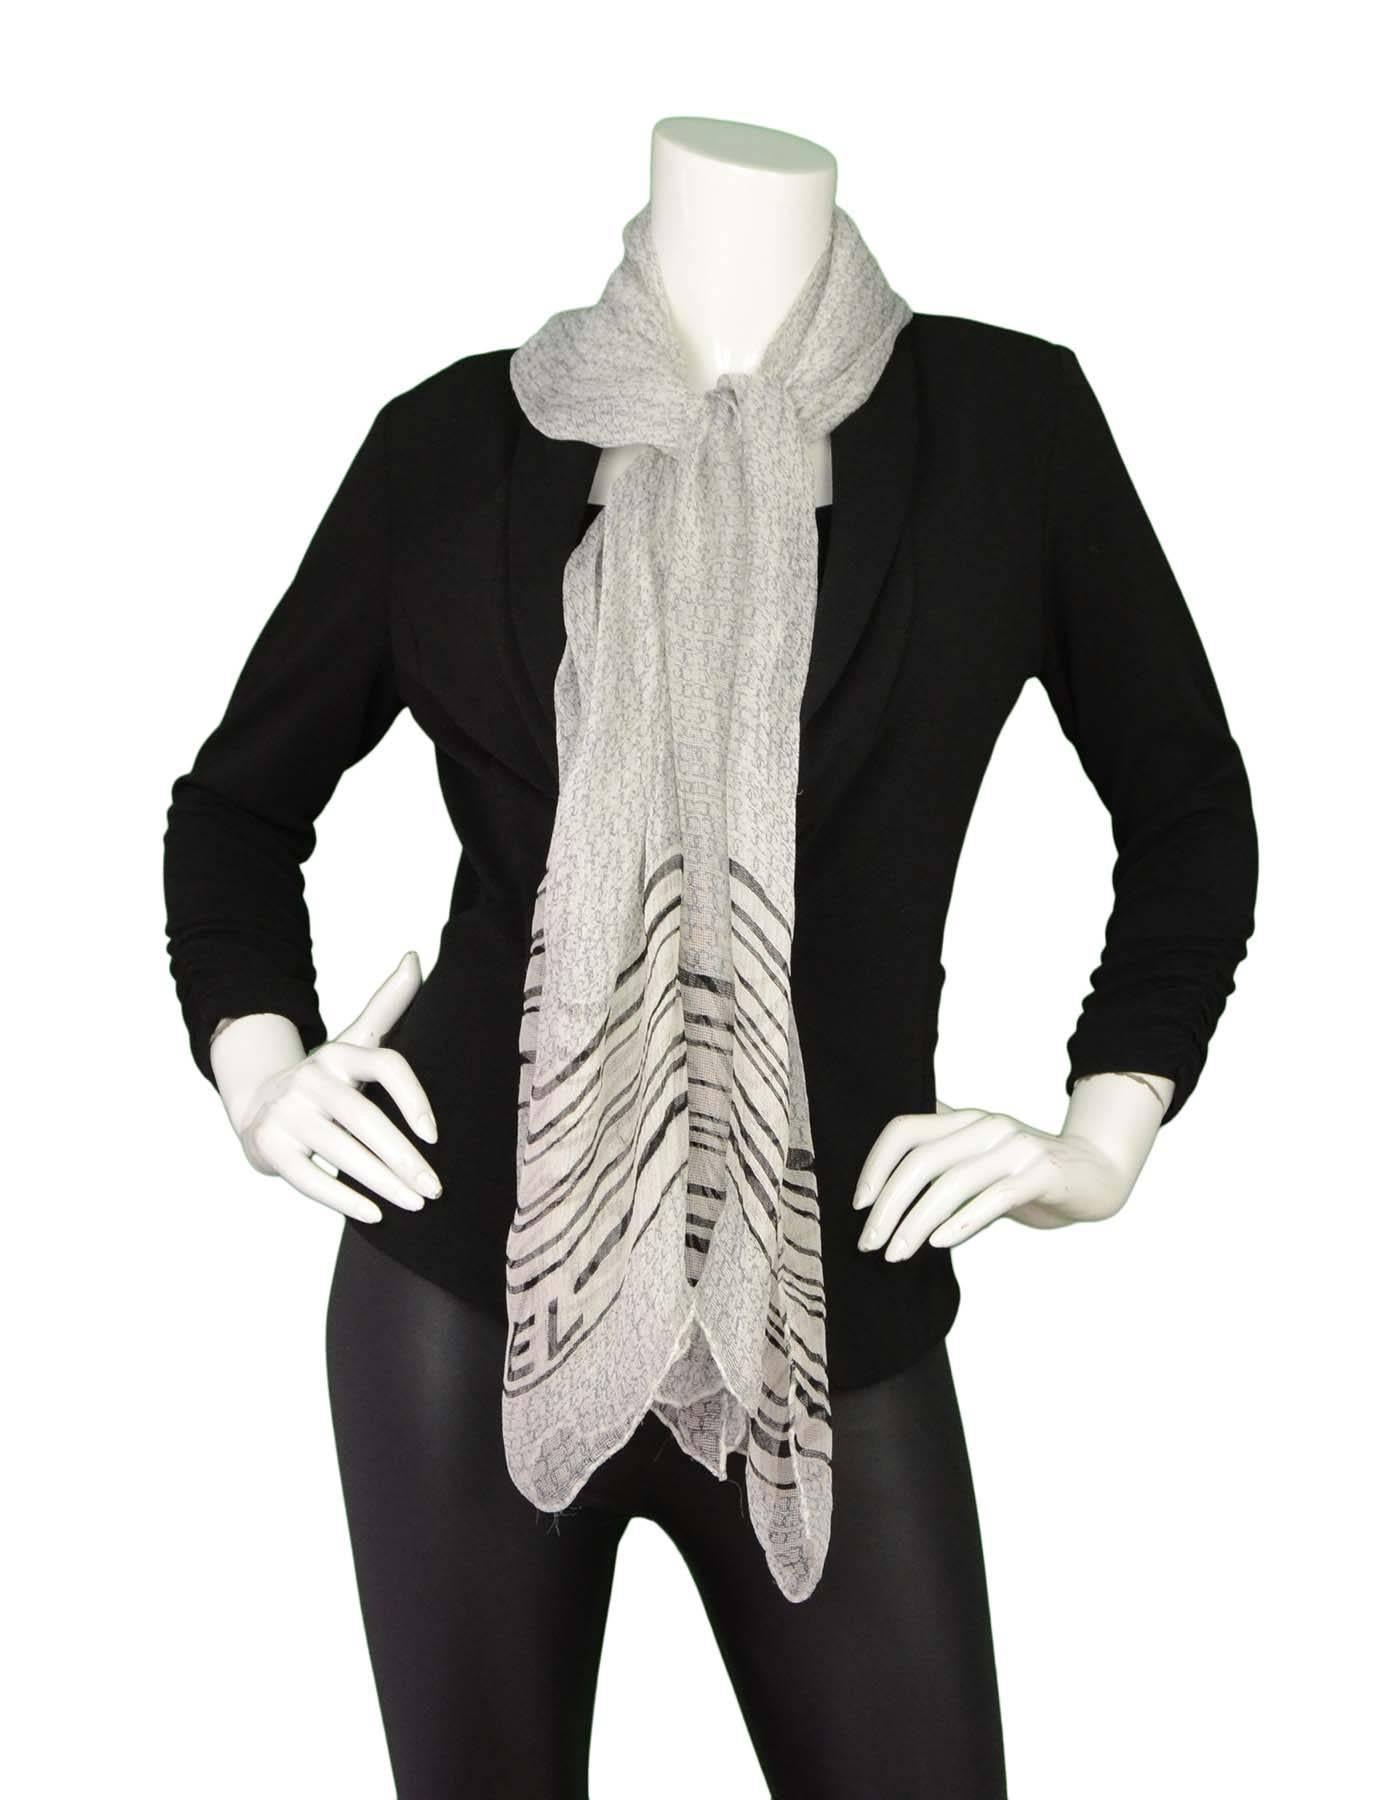 Chanel Black and White Sheer Silk CC Scarf

Made in: Italy
Color: Black and white
Composition: 100% Silk
Overall Condition: Very good pre-owned condition with the exception of minor pulling

Length: 66